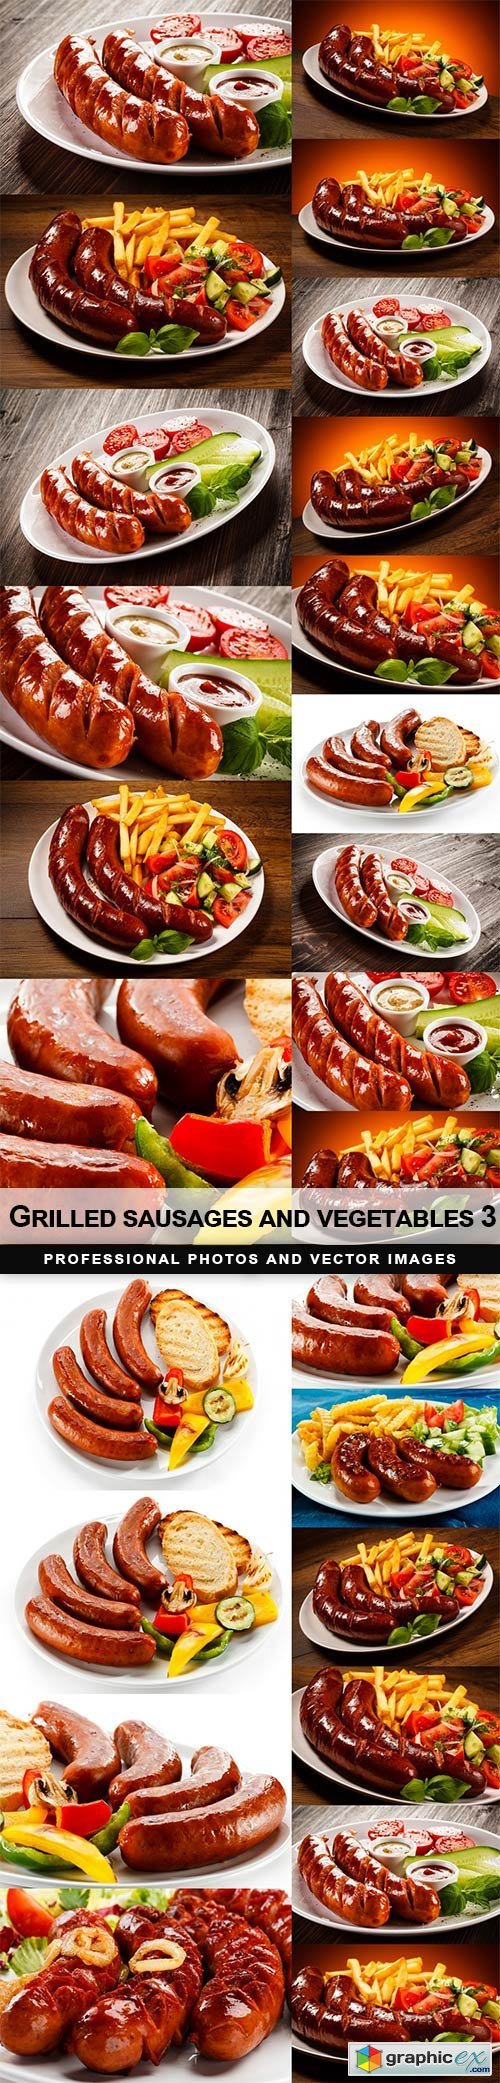 Grilled sausages and vegetables 3